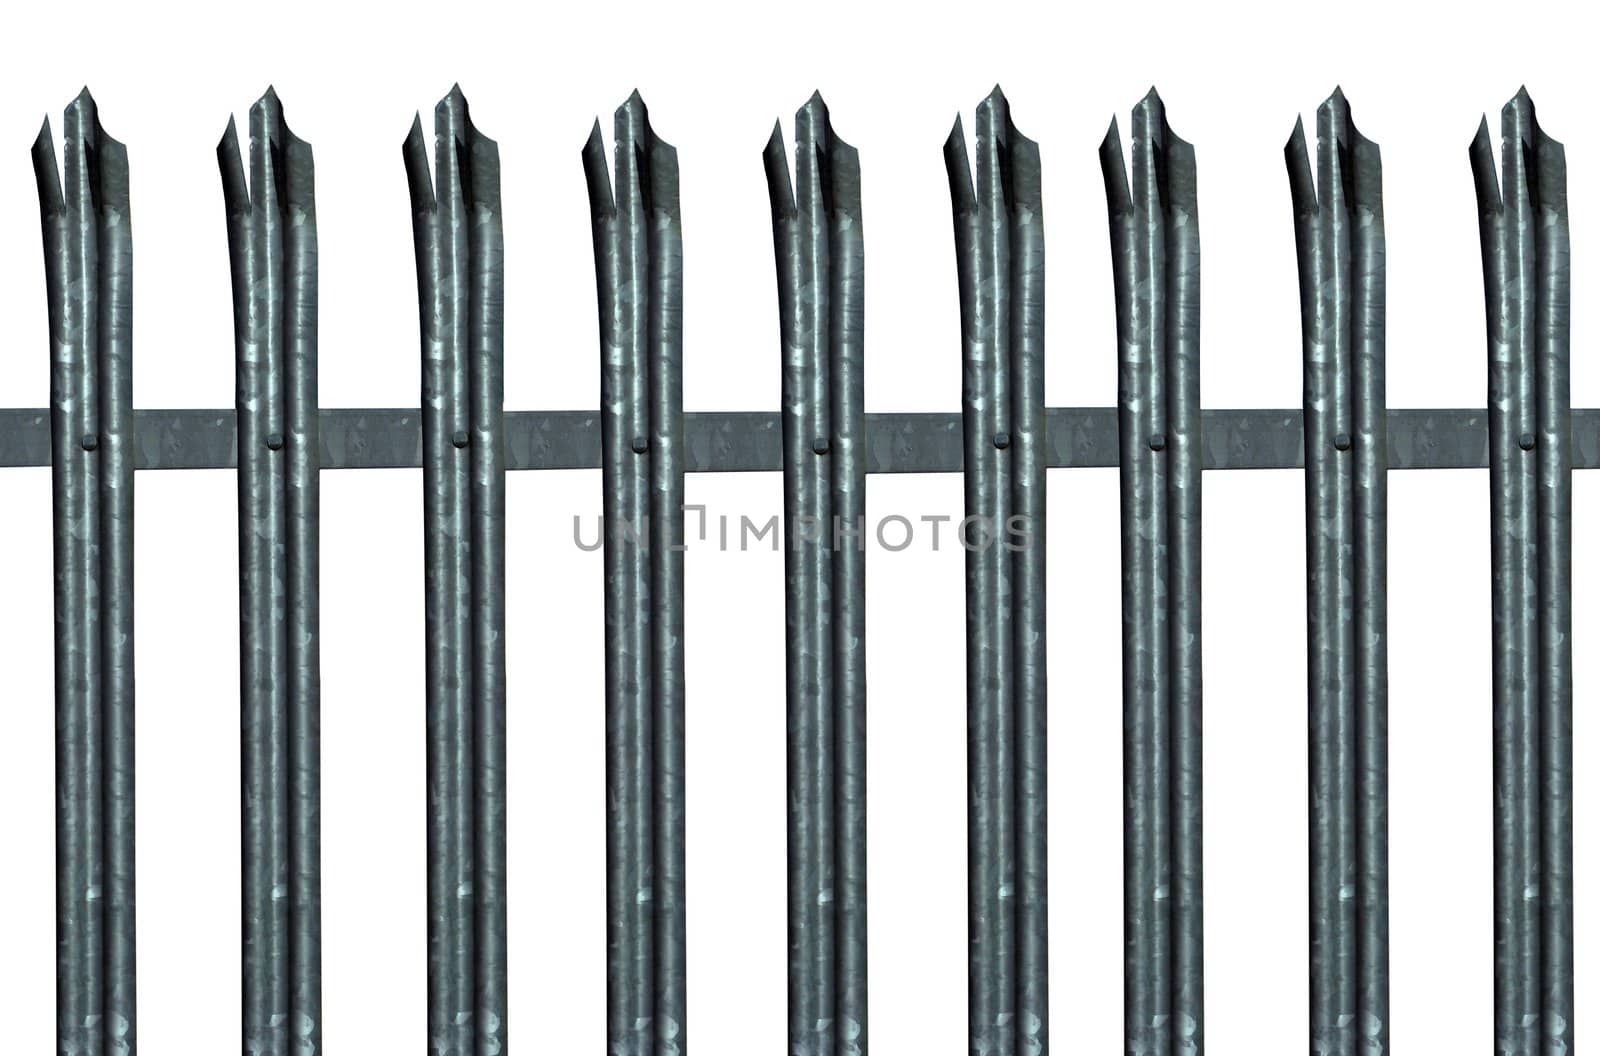 Pointed metal security fencing for industrial units. Isolated on white